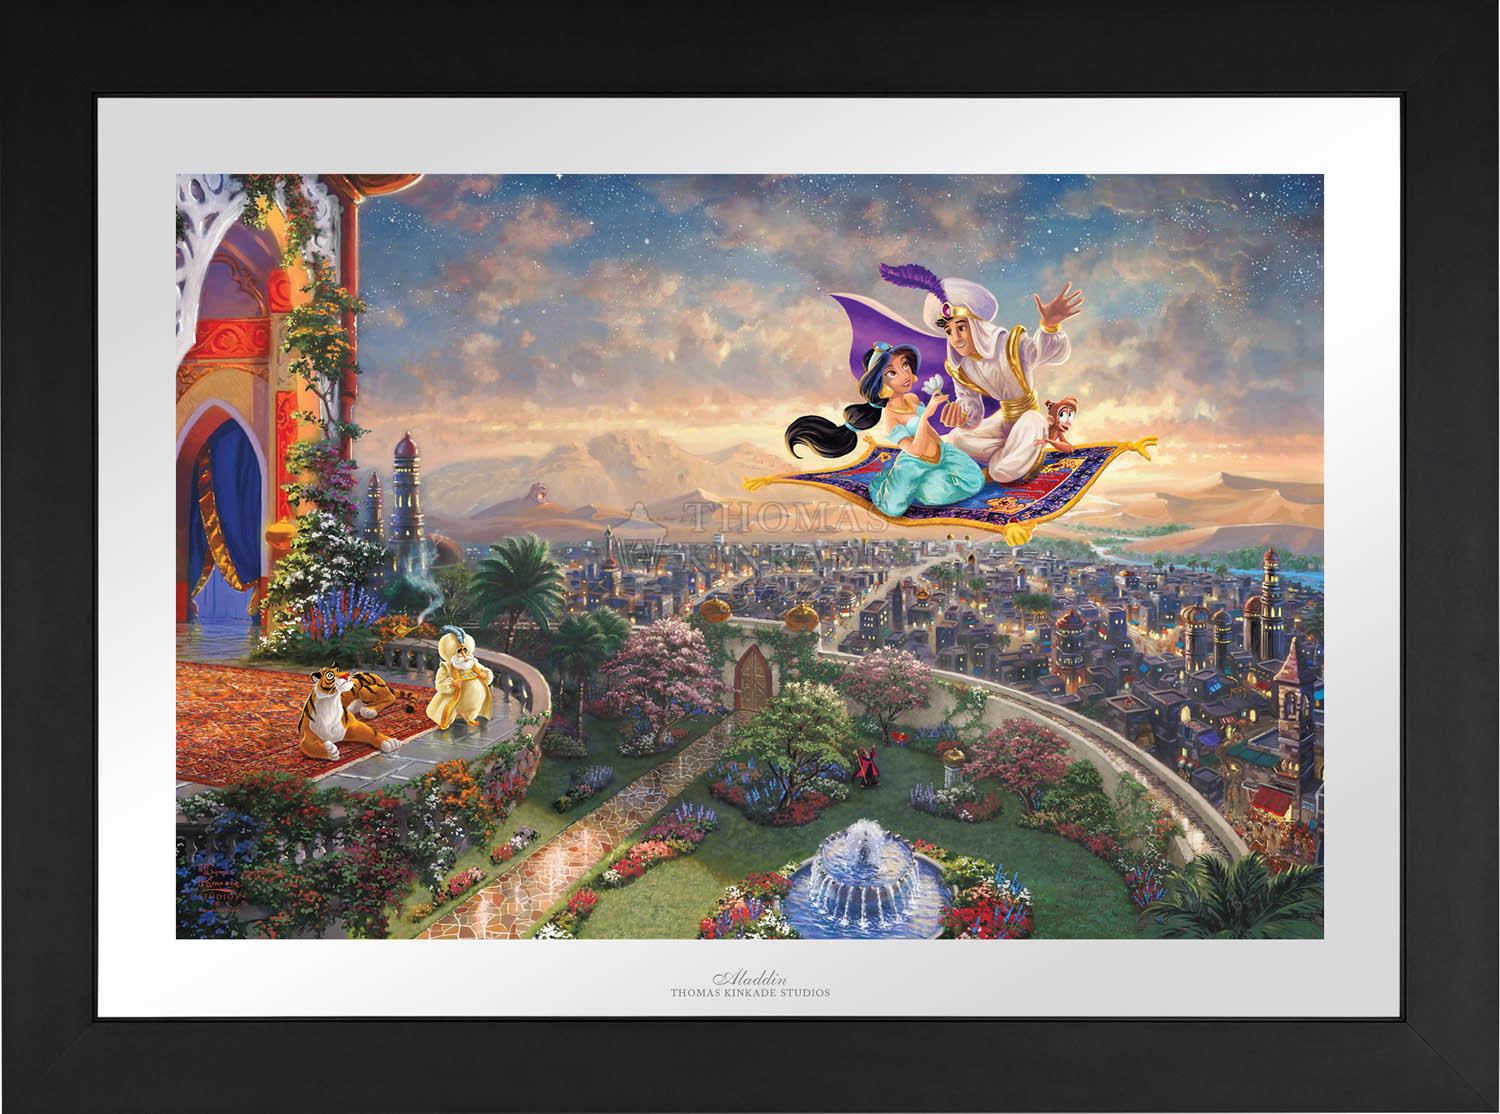 Aladdin and Jasmine soar above Agrabah and the neighboring kingdom on a magic carpet ride, as the Sultan of Agrabah (her father) and her overprotective pet tiger Rajah watch - Aladdin and Jasmine soar above Agrabah and the neighboring kingdom on a magic carpet ride, as the Sultan of Agrabah (her father) and her overprotective pet tiger Rajah watch - Satin Black Frame.